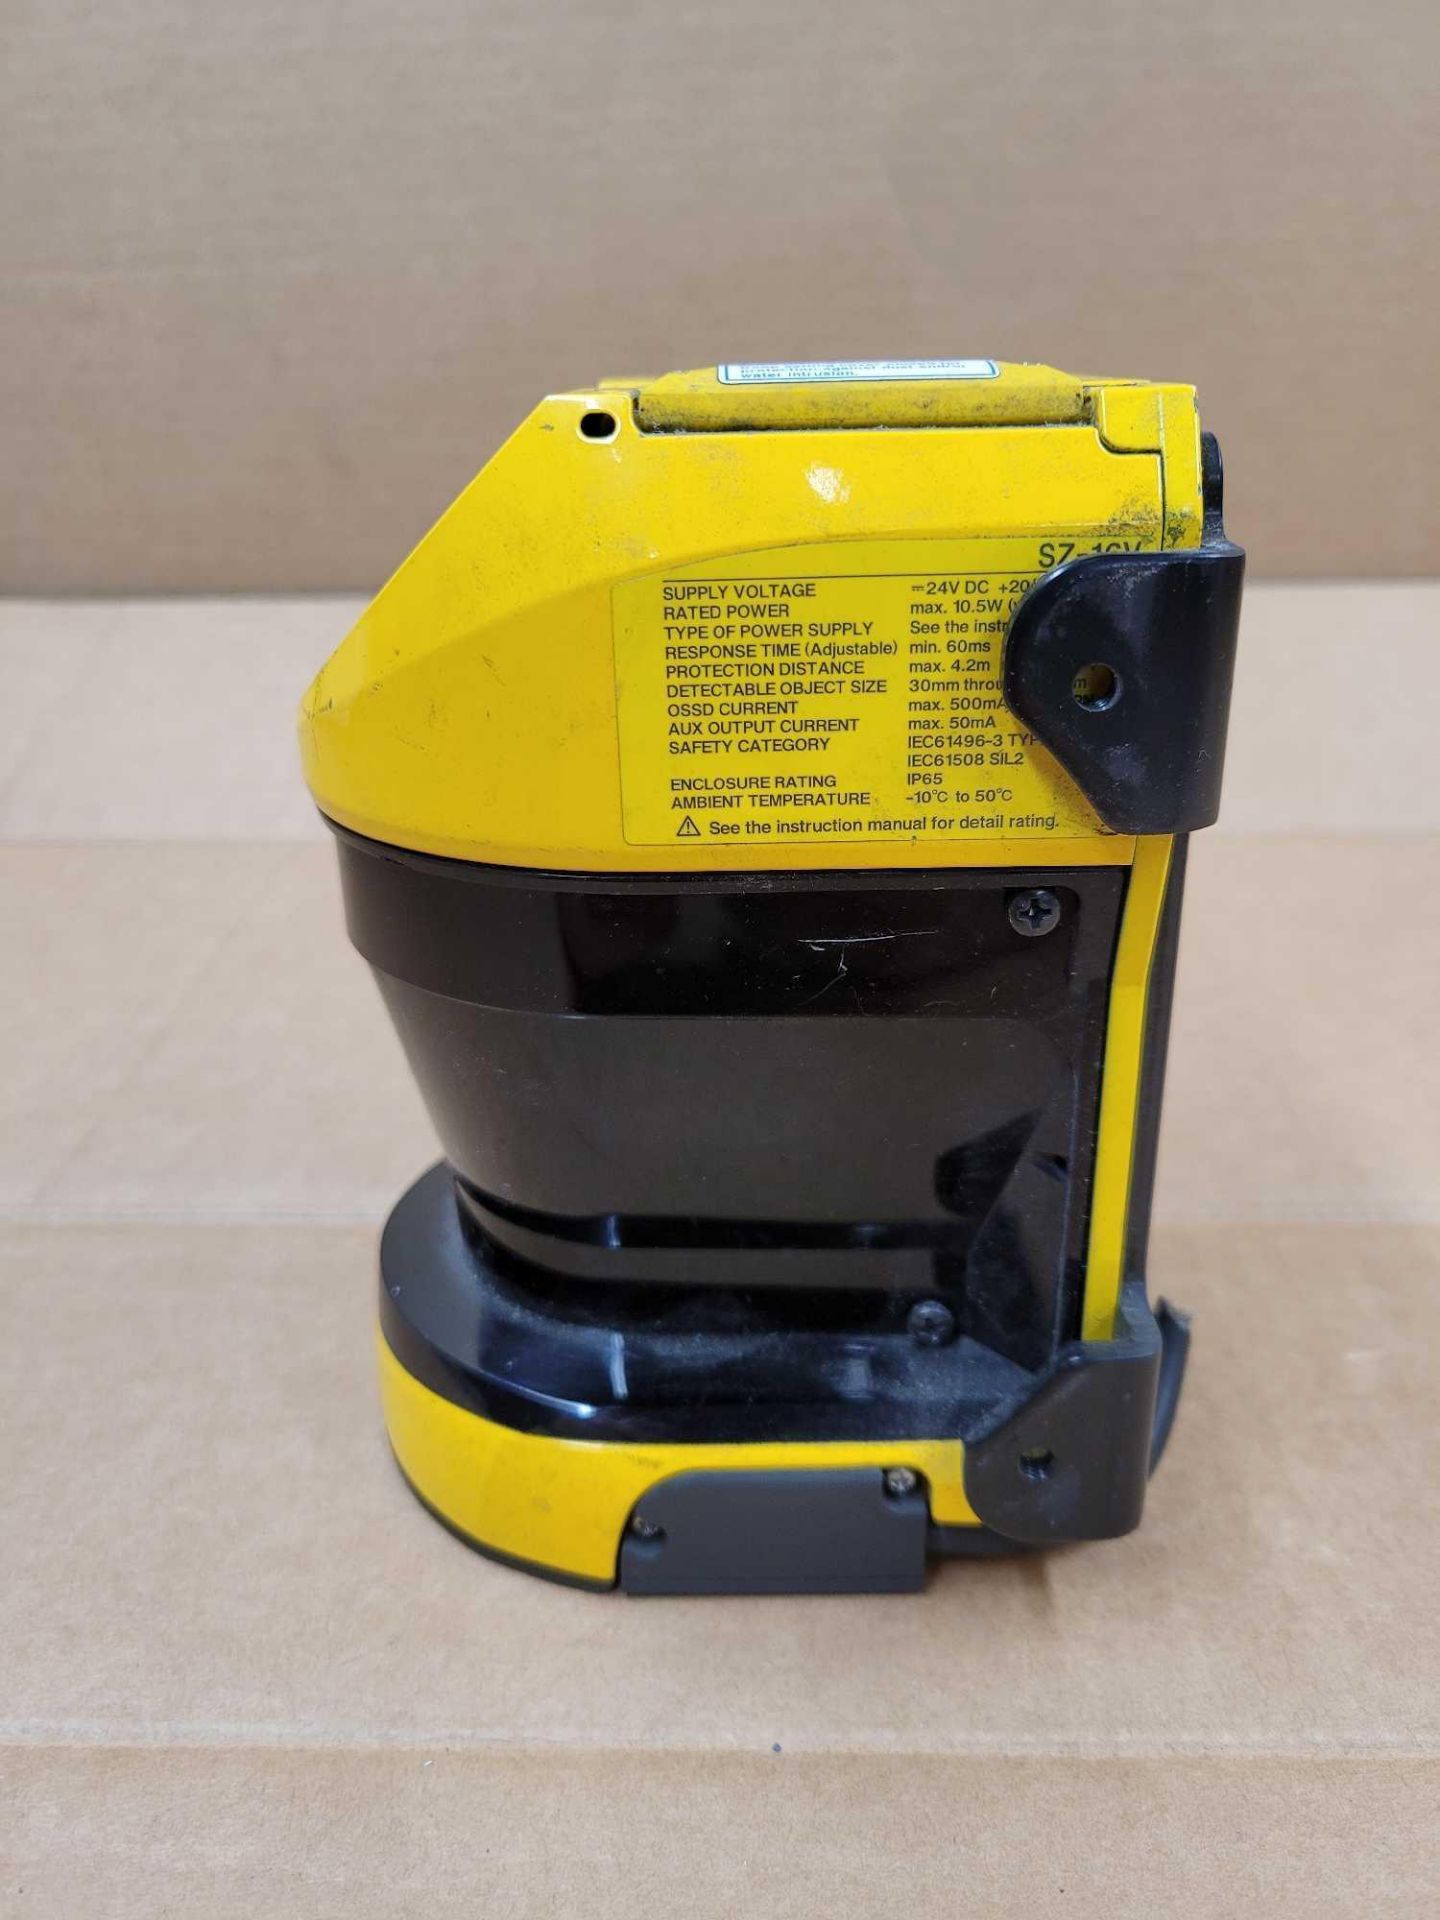 KEYENCE SZ-16V / Safety Laser Scanner  /  Lot Weight: 4.0 lbs - Image 5 of 7